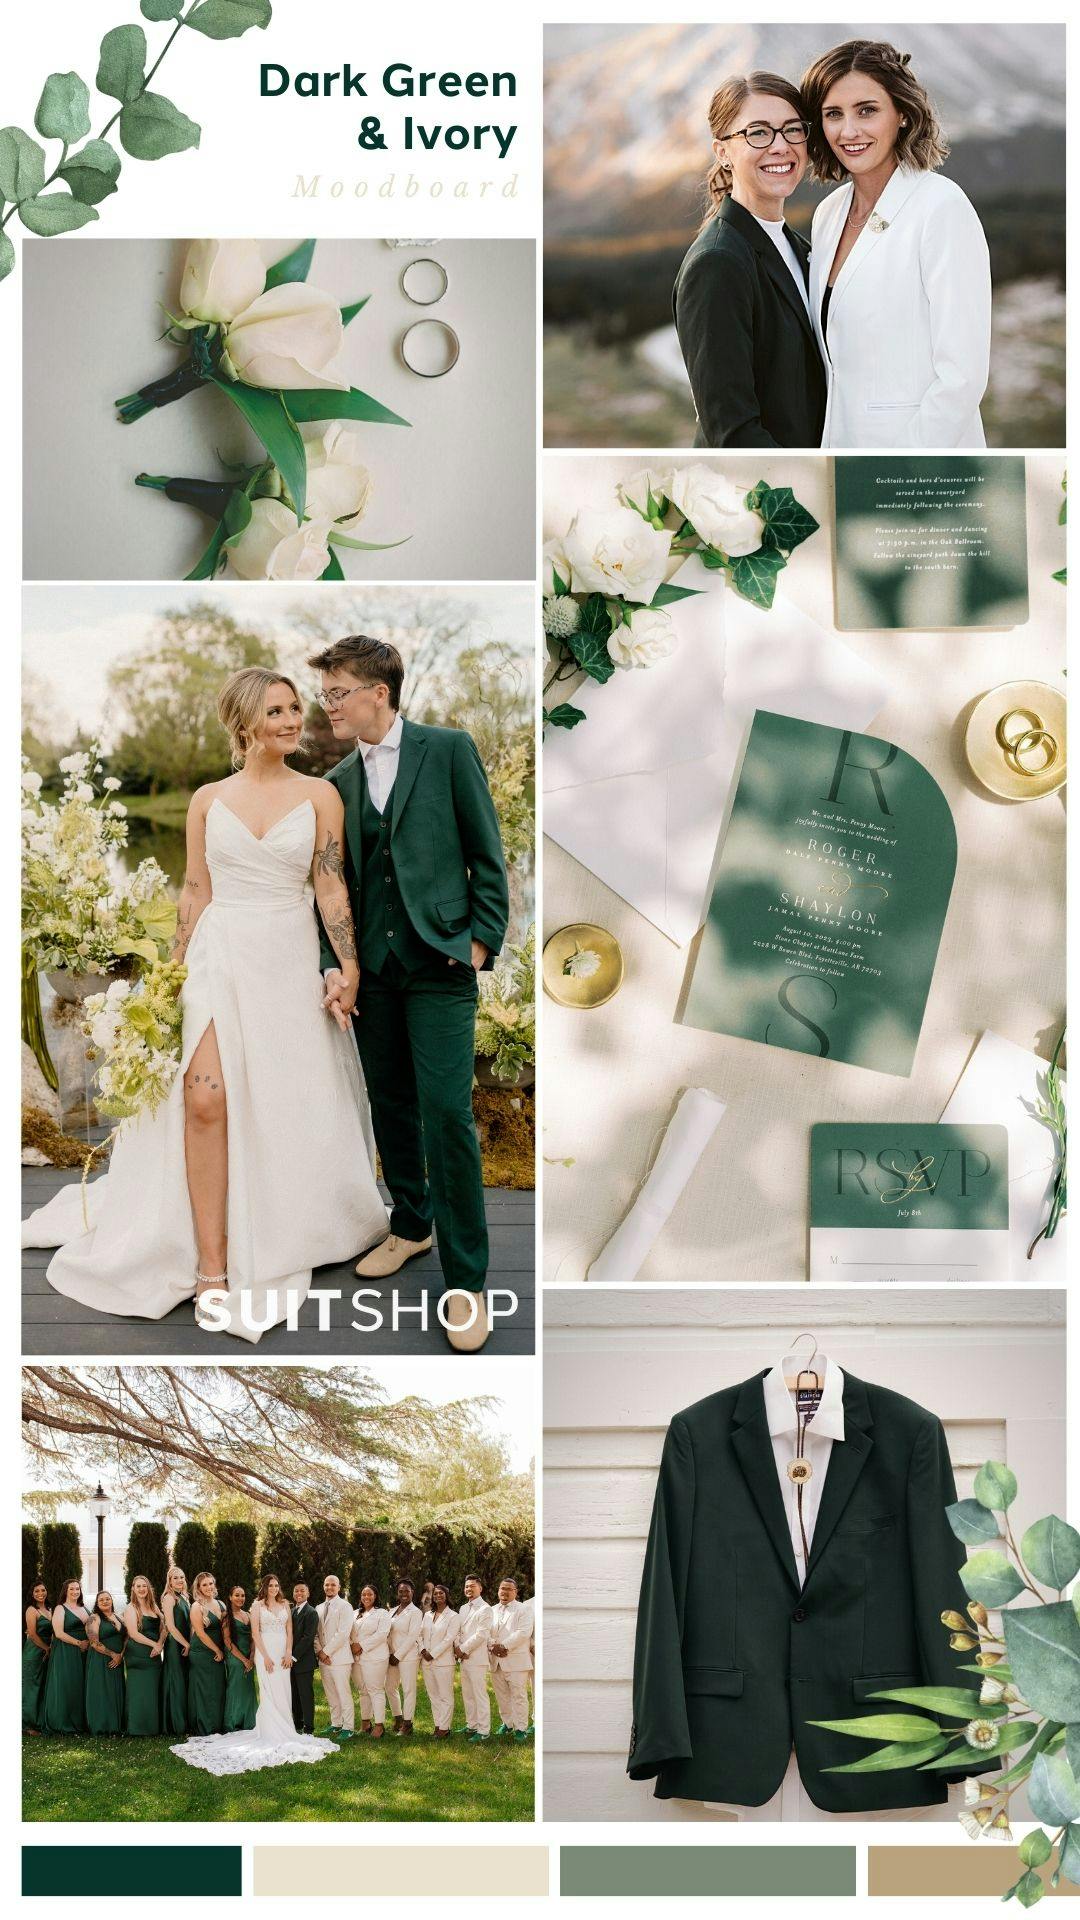 Modern wedding mood board with green and ivory wedding party attire, dark green suits, white bridal tuxedo, tan suits for groomsmen, and neutral wedding flowers. 